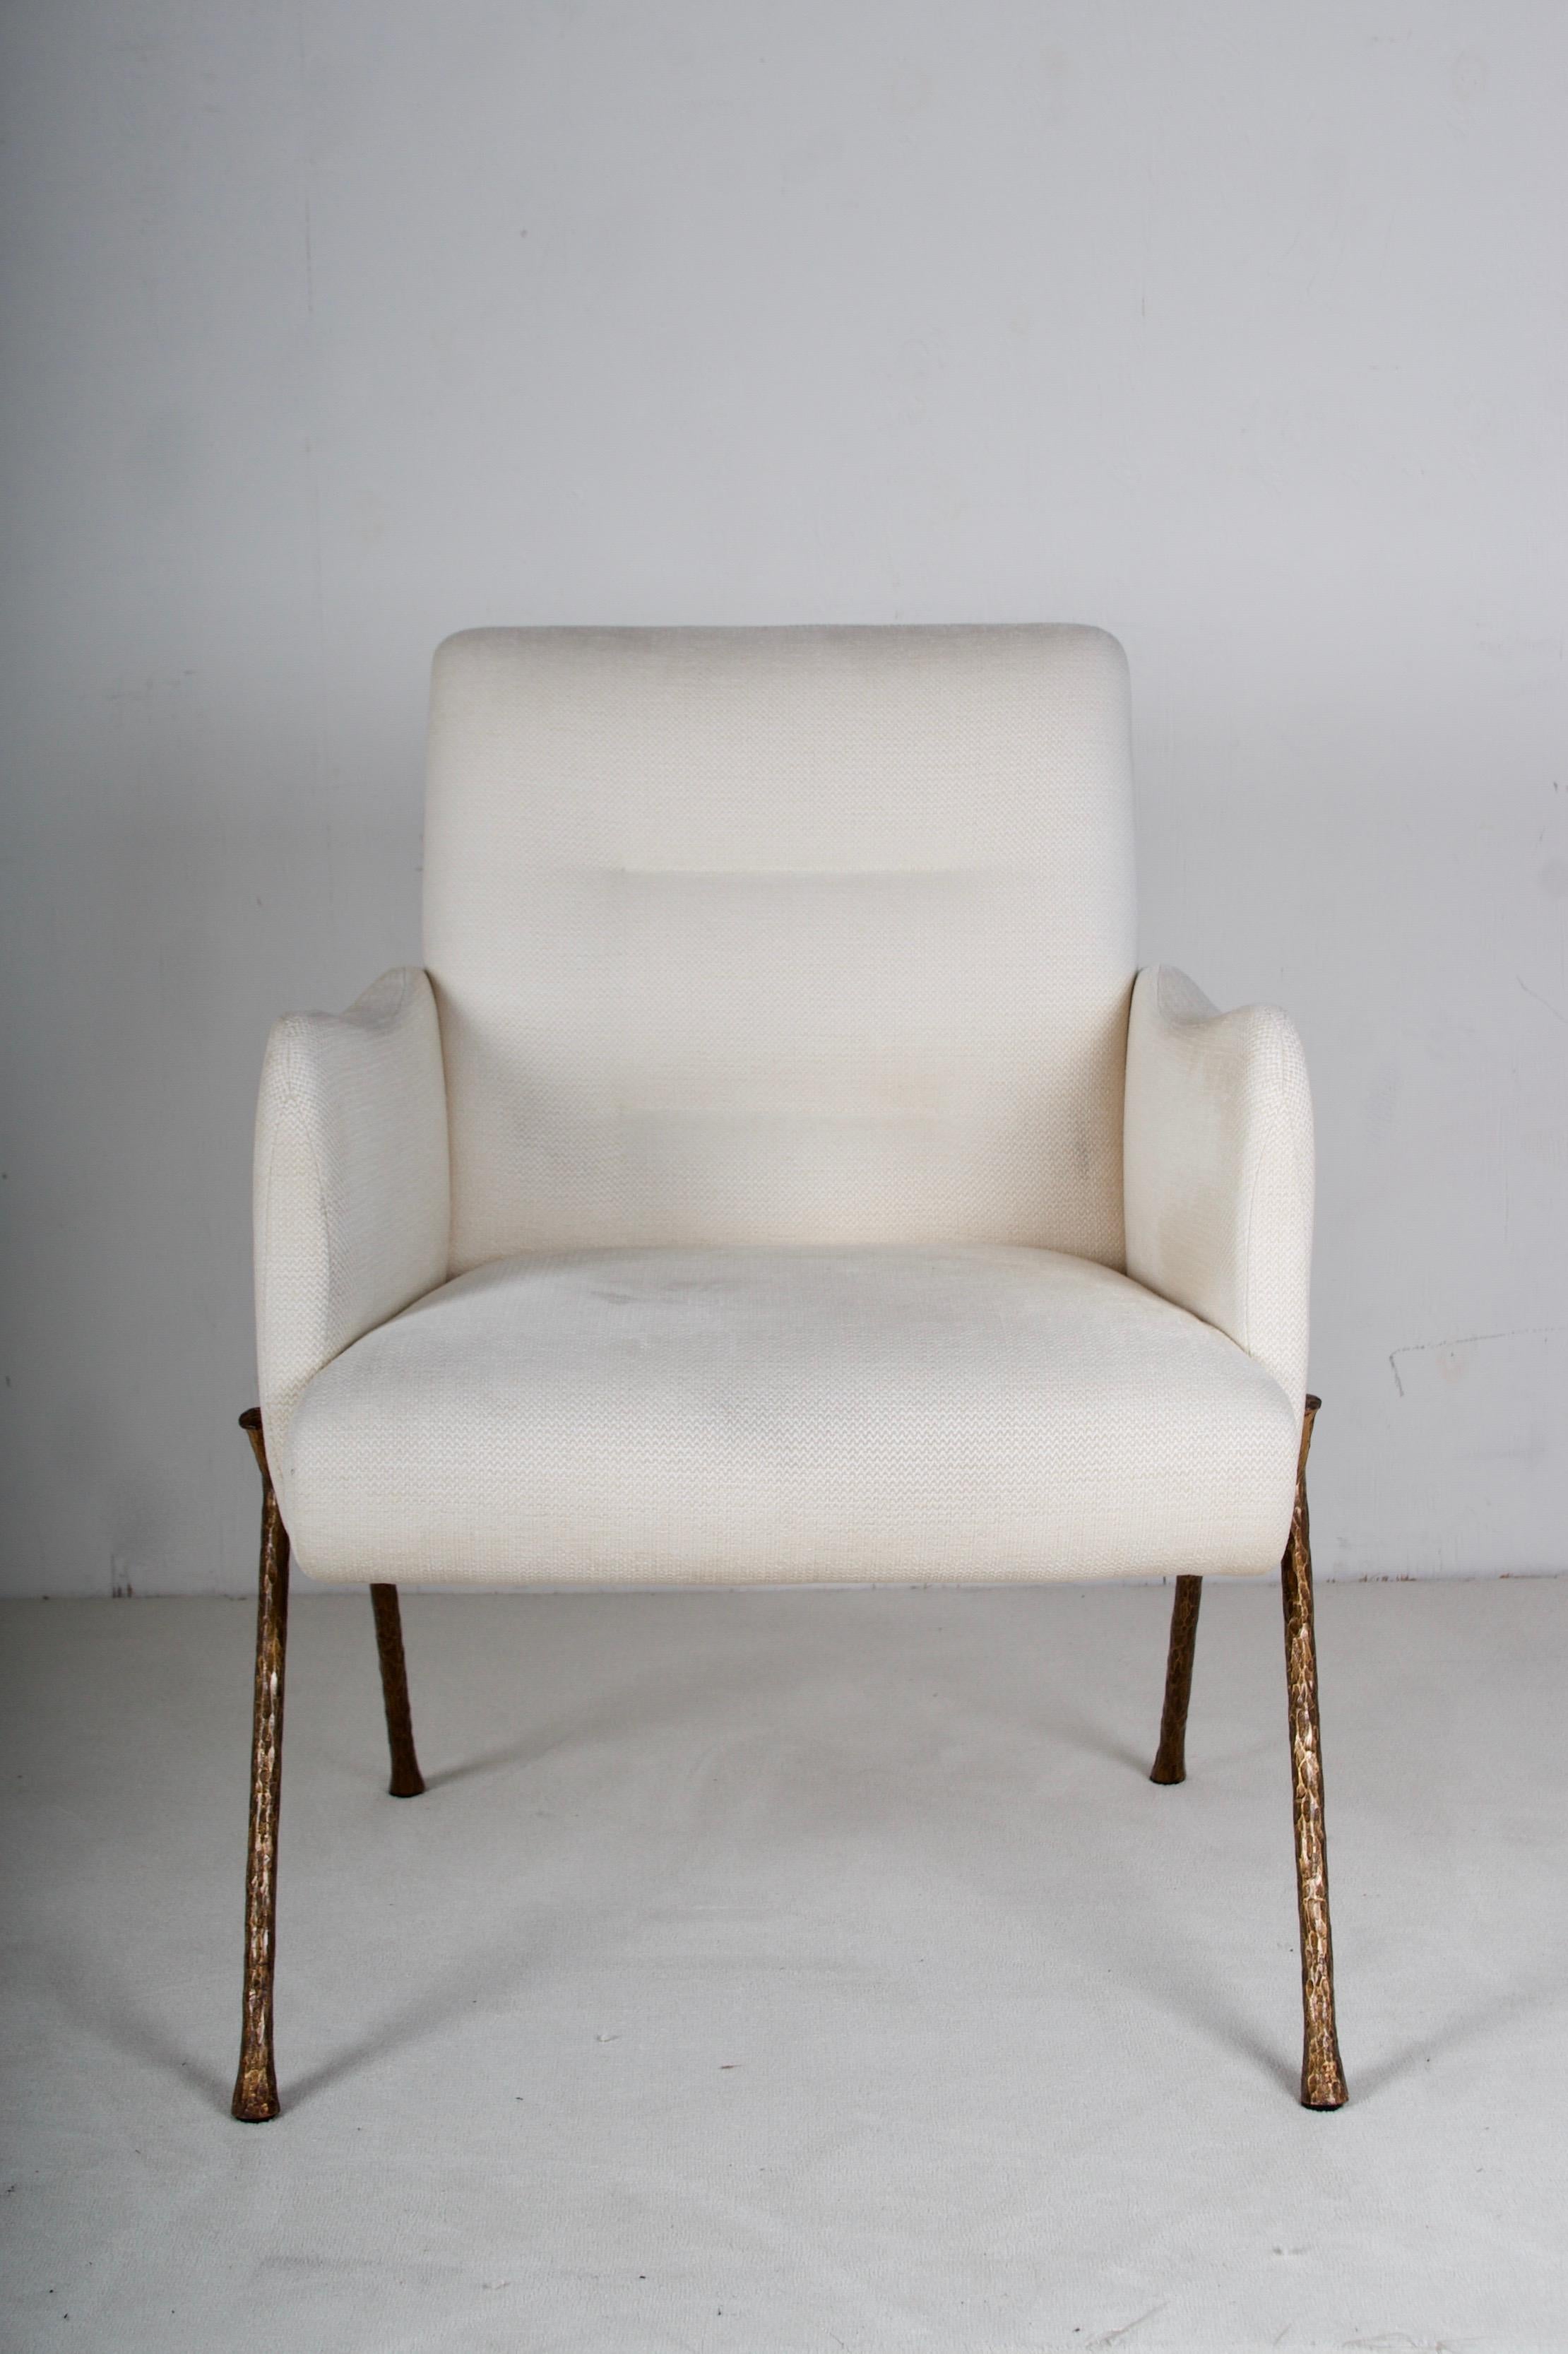 A very lovely armchair fully upholstered, legs in hammered
bronze. The linen blend fabric is slightly soiled but in great
condition.

There are three chairs available.